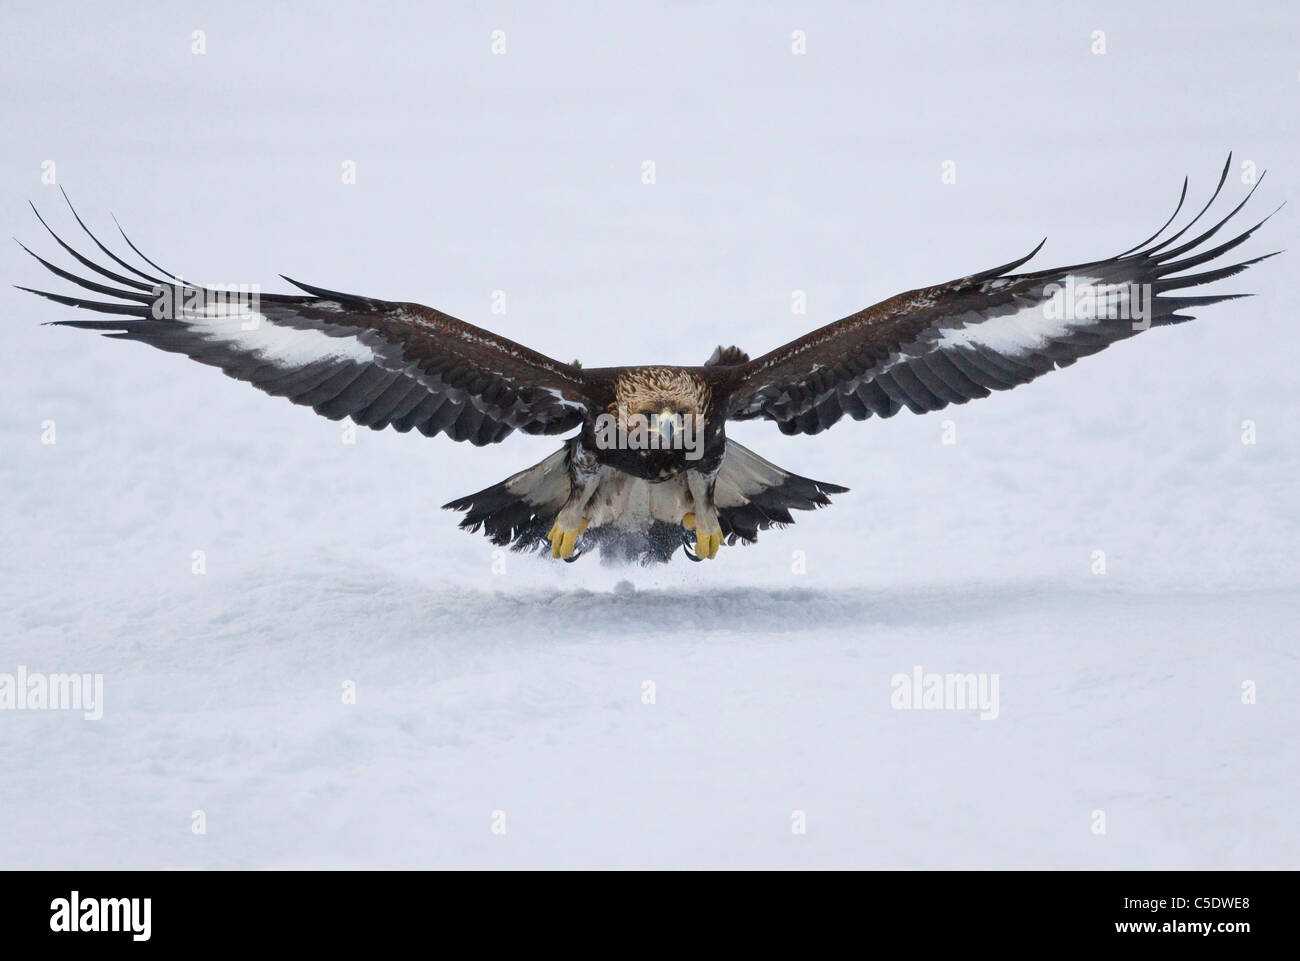 Close-up of a golden eagle with spread wings in flight over snowed landscape Stock Photo